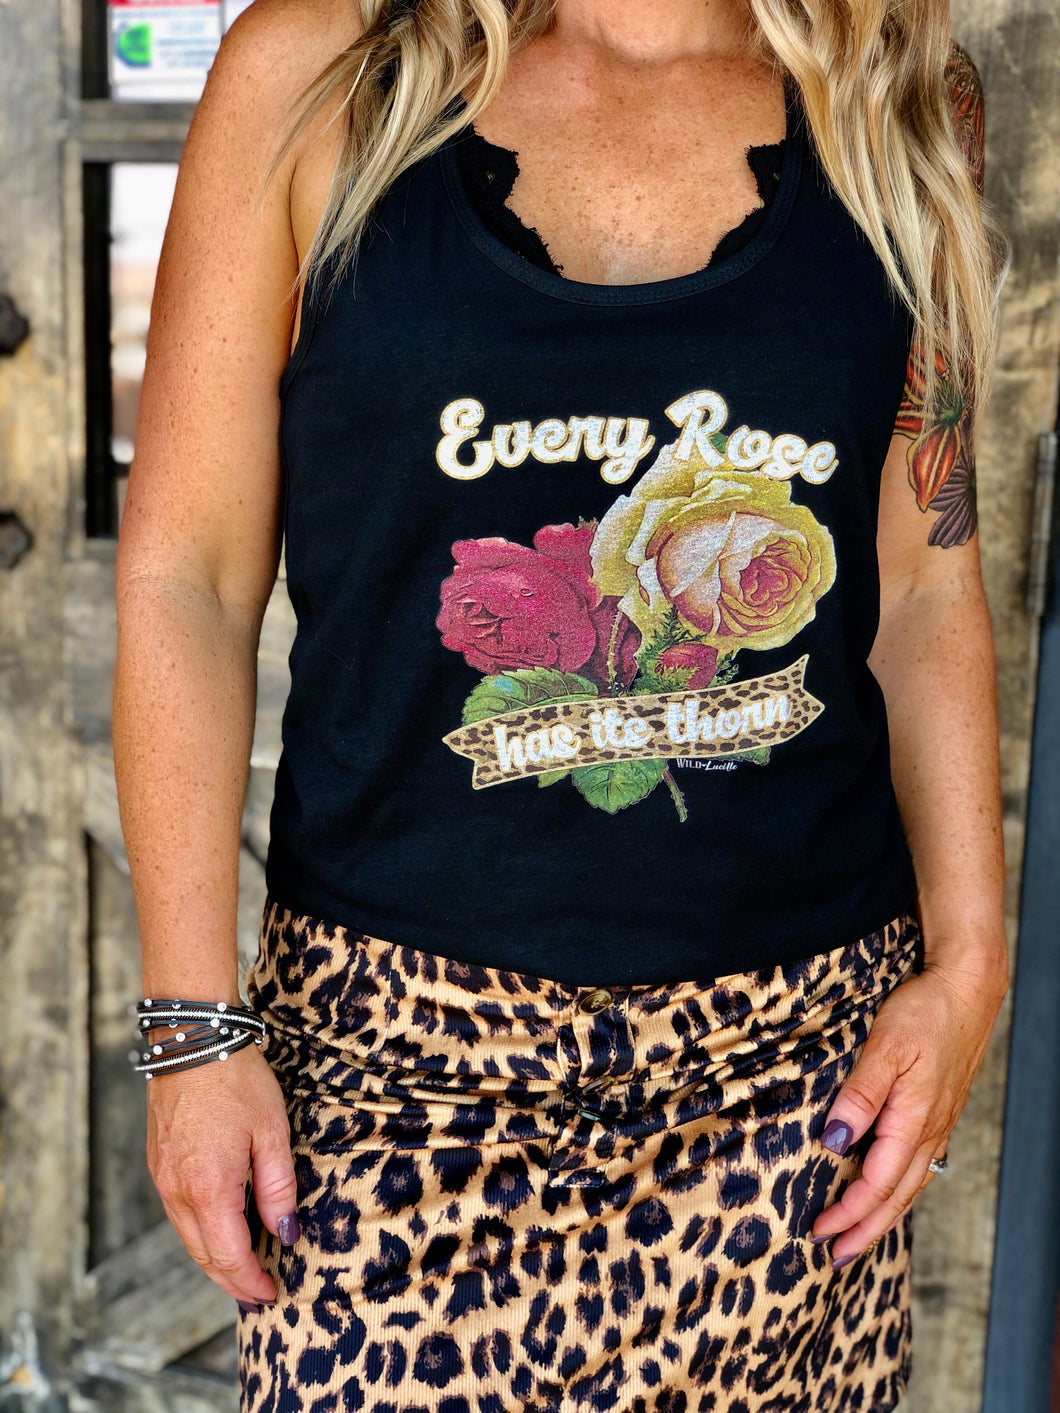 Every Rose has its Thorn tank